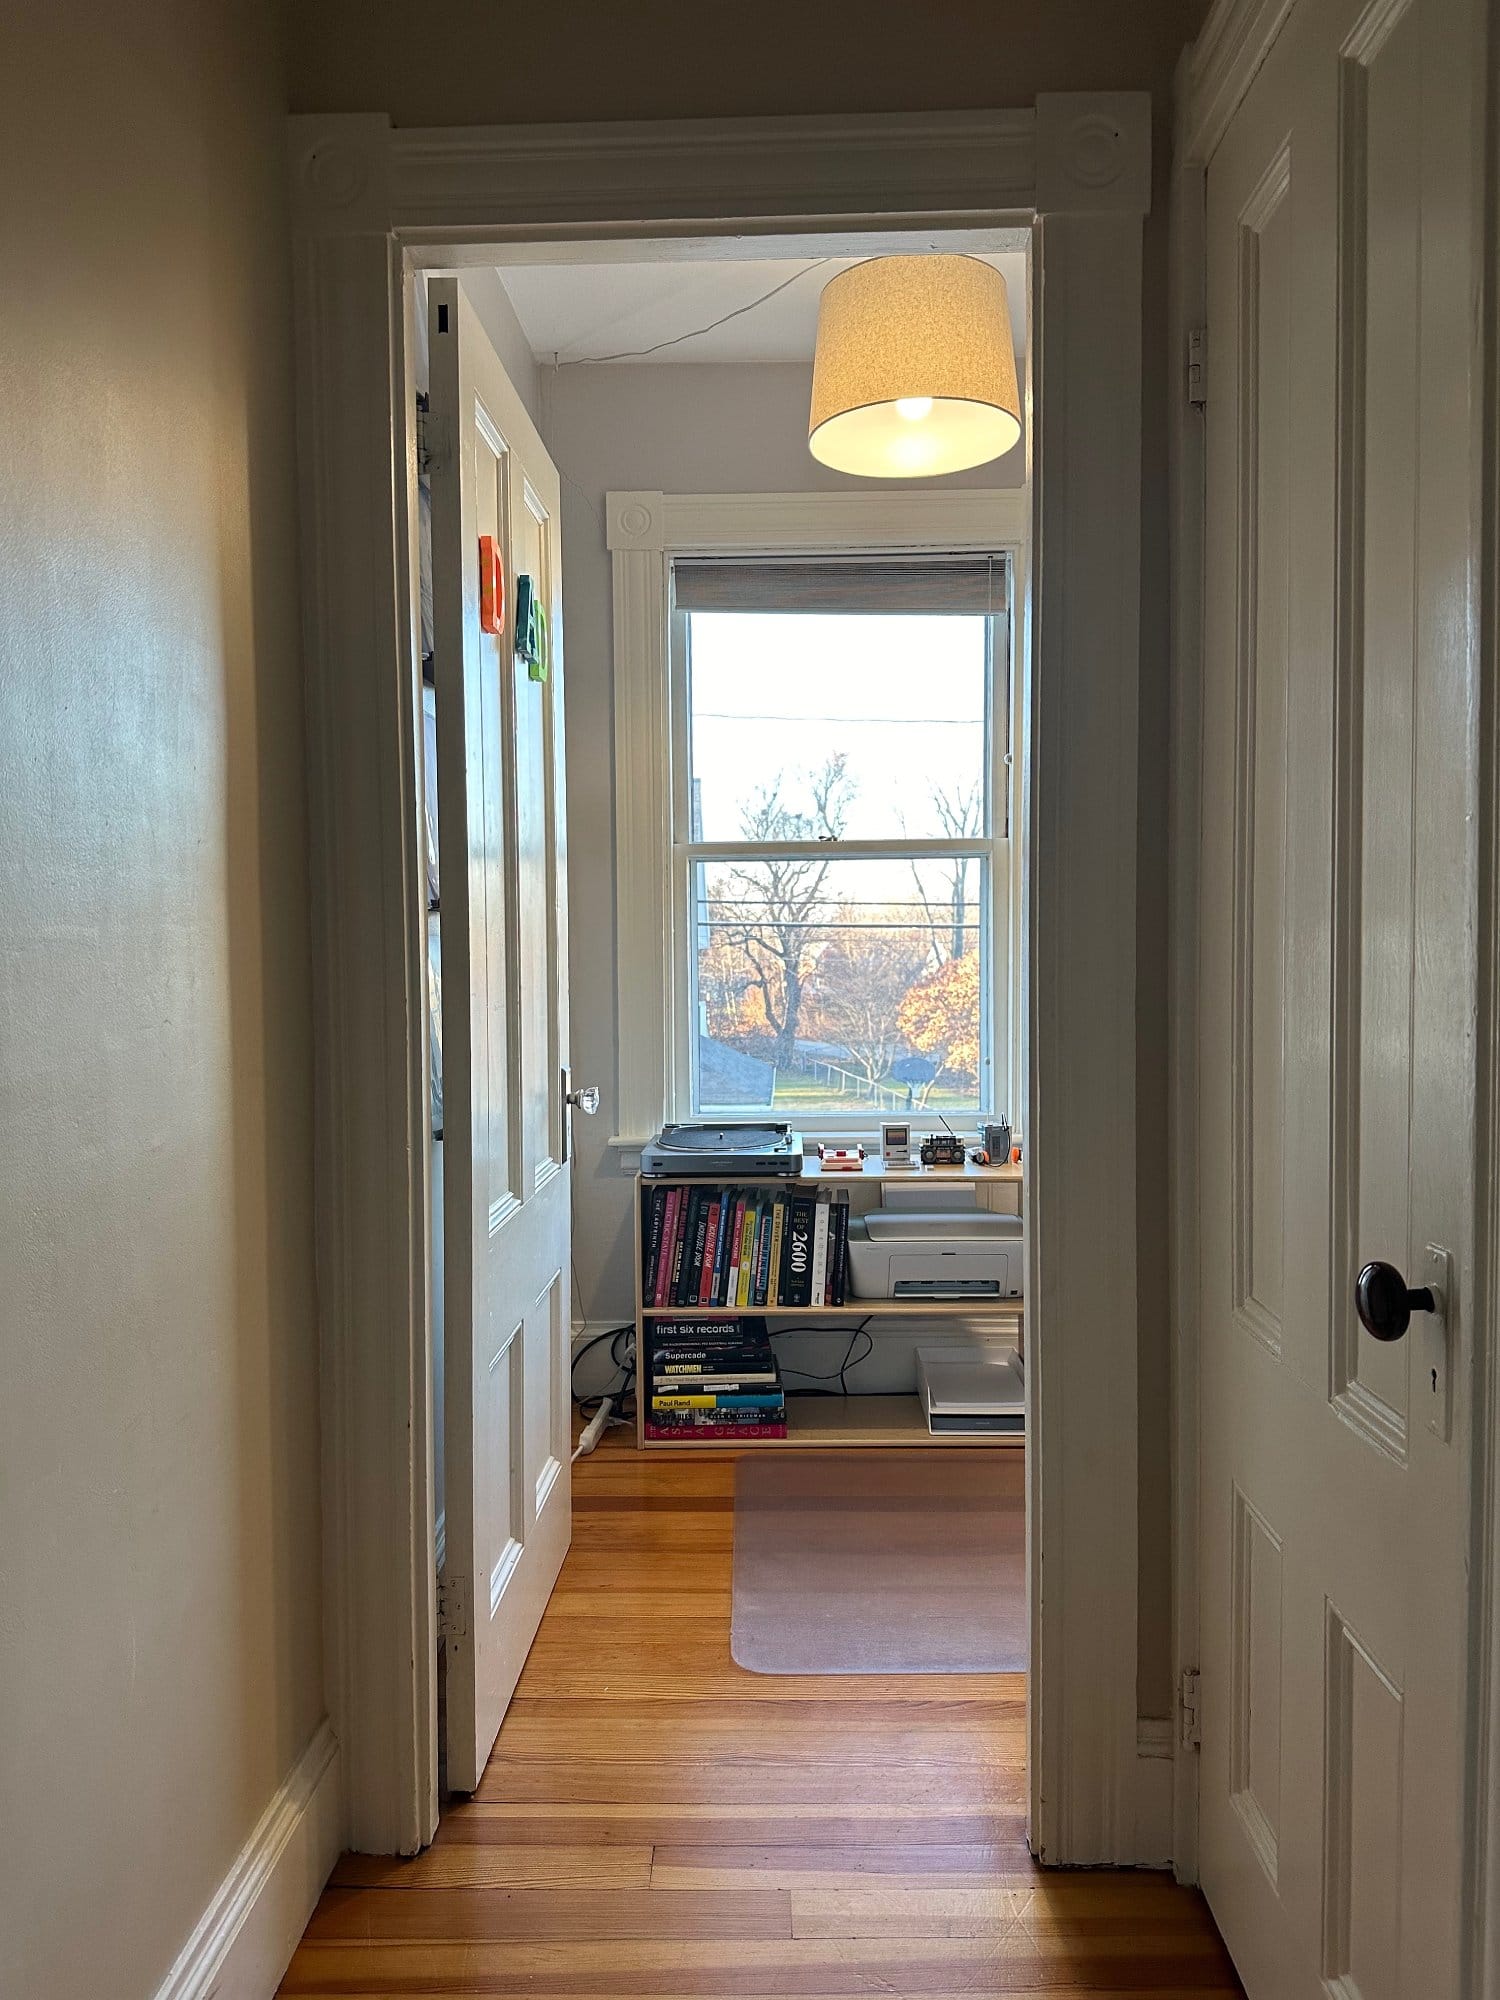 View from a hallway into a sunlit home office with a bookshelf, desk and chair by the window, and a hanging light fixture above